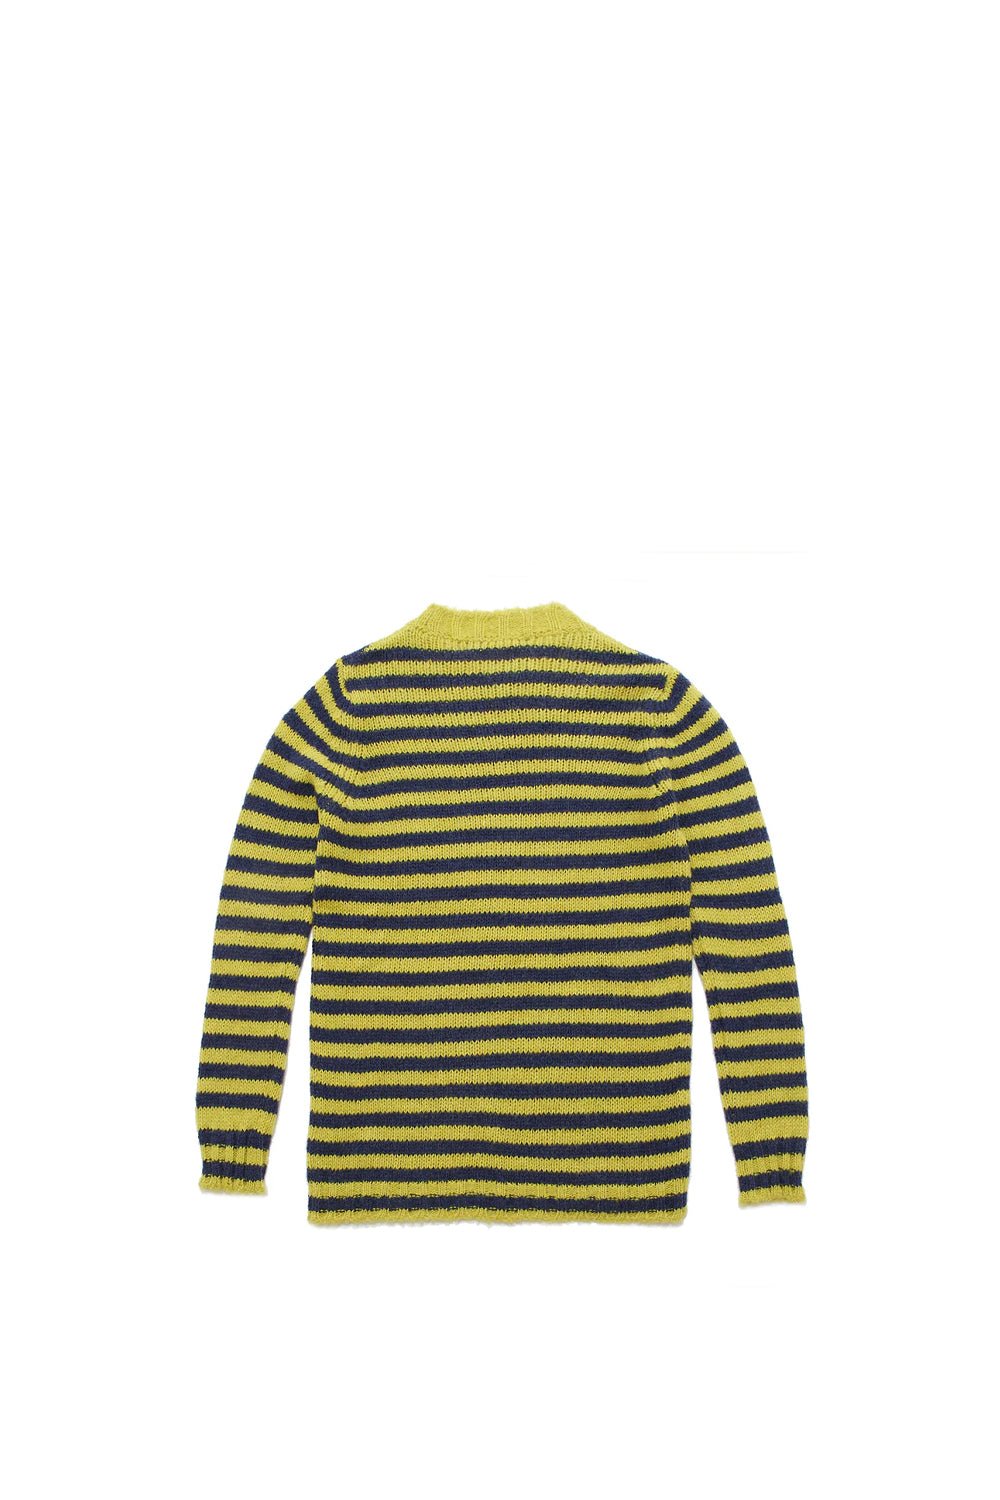 LIL LOGO OVER SWEATER Striped knit round neck sweater. 42% Acrylic 30% Polyamide 14% Mohair 14% Wool HTC LOS ANGELES